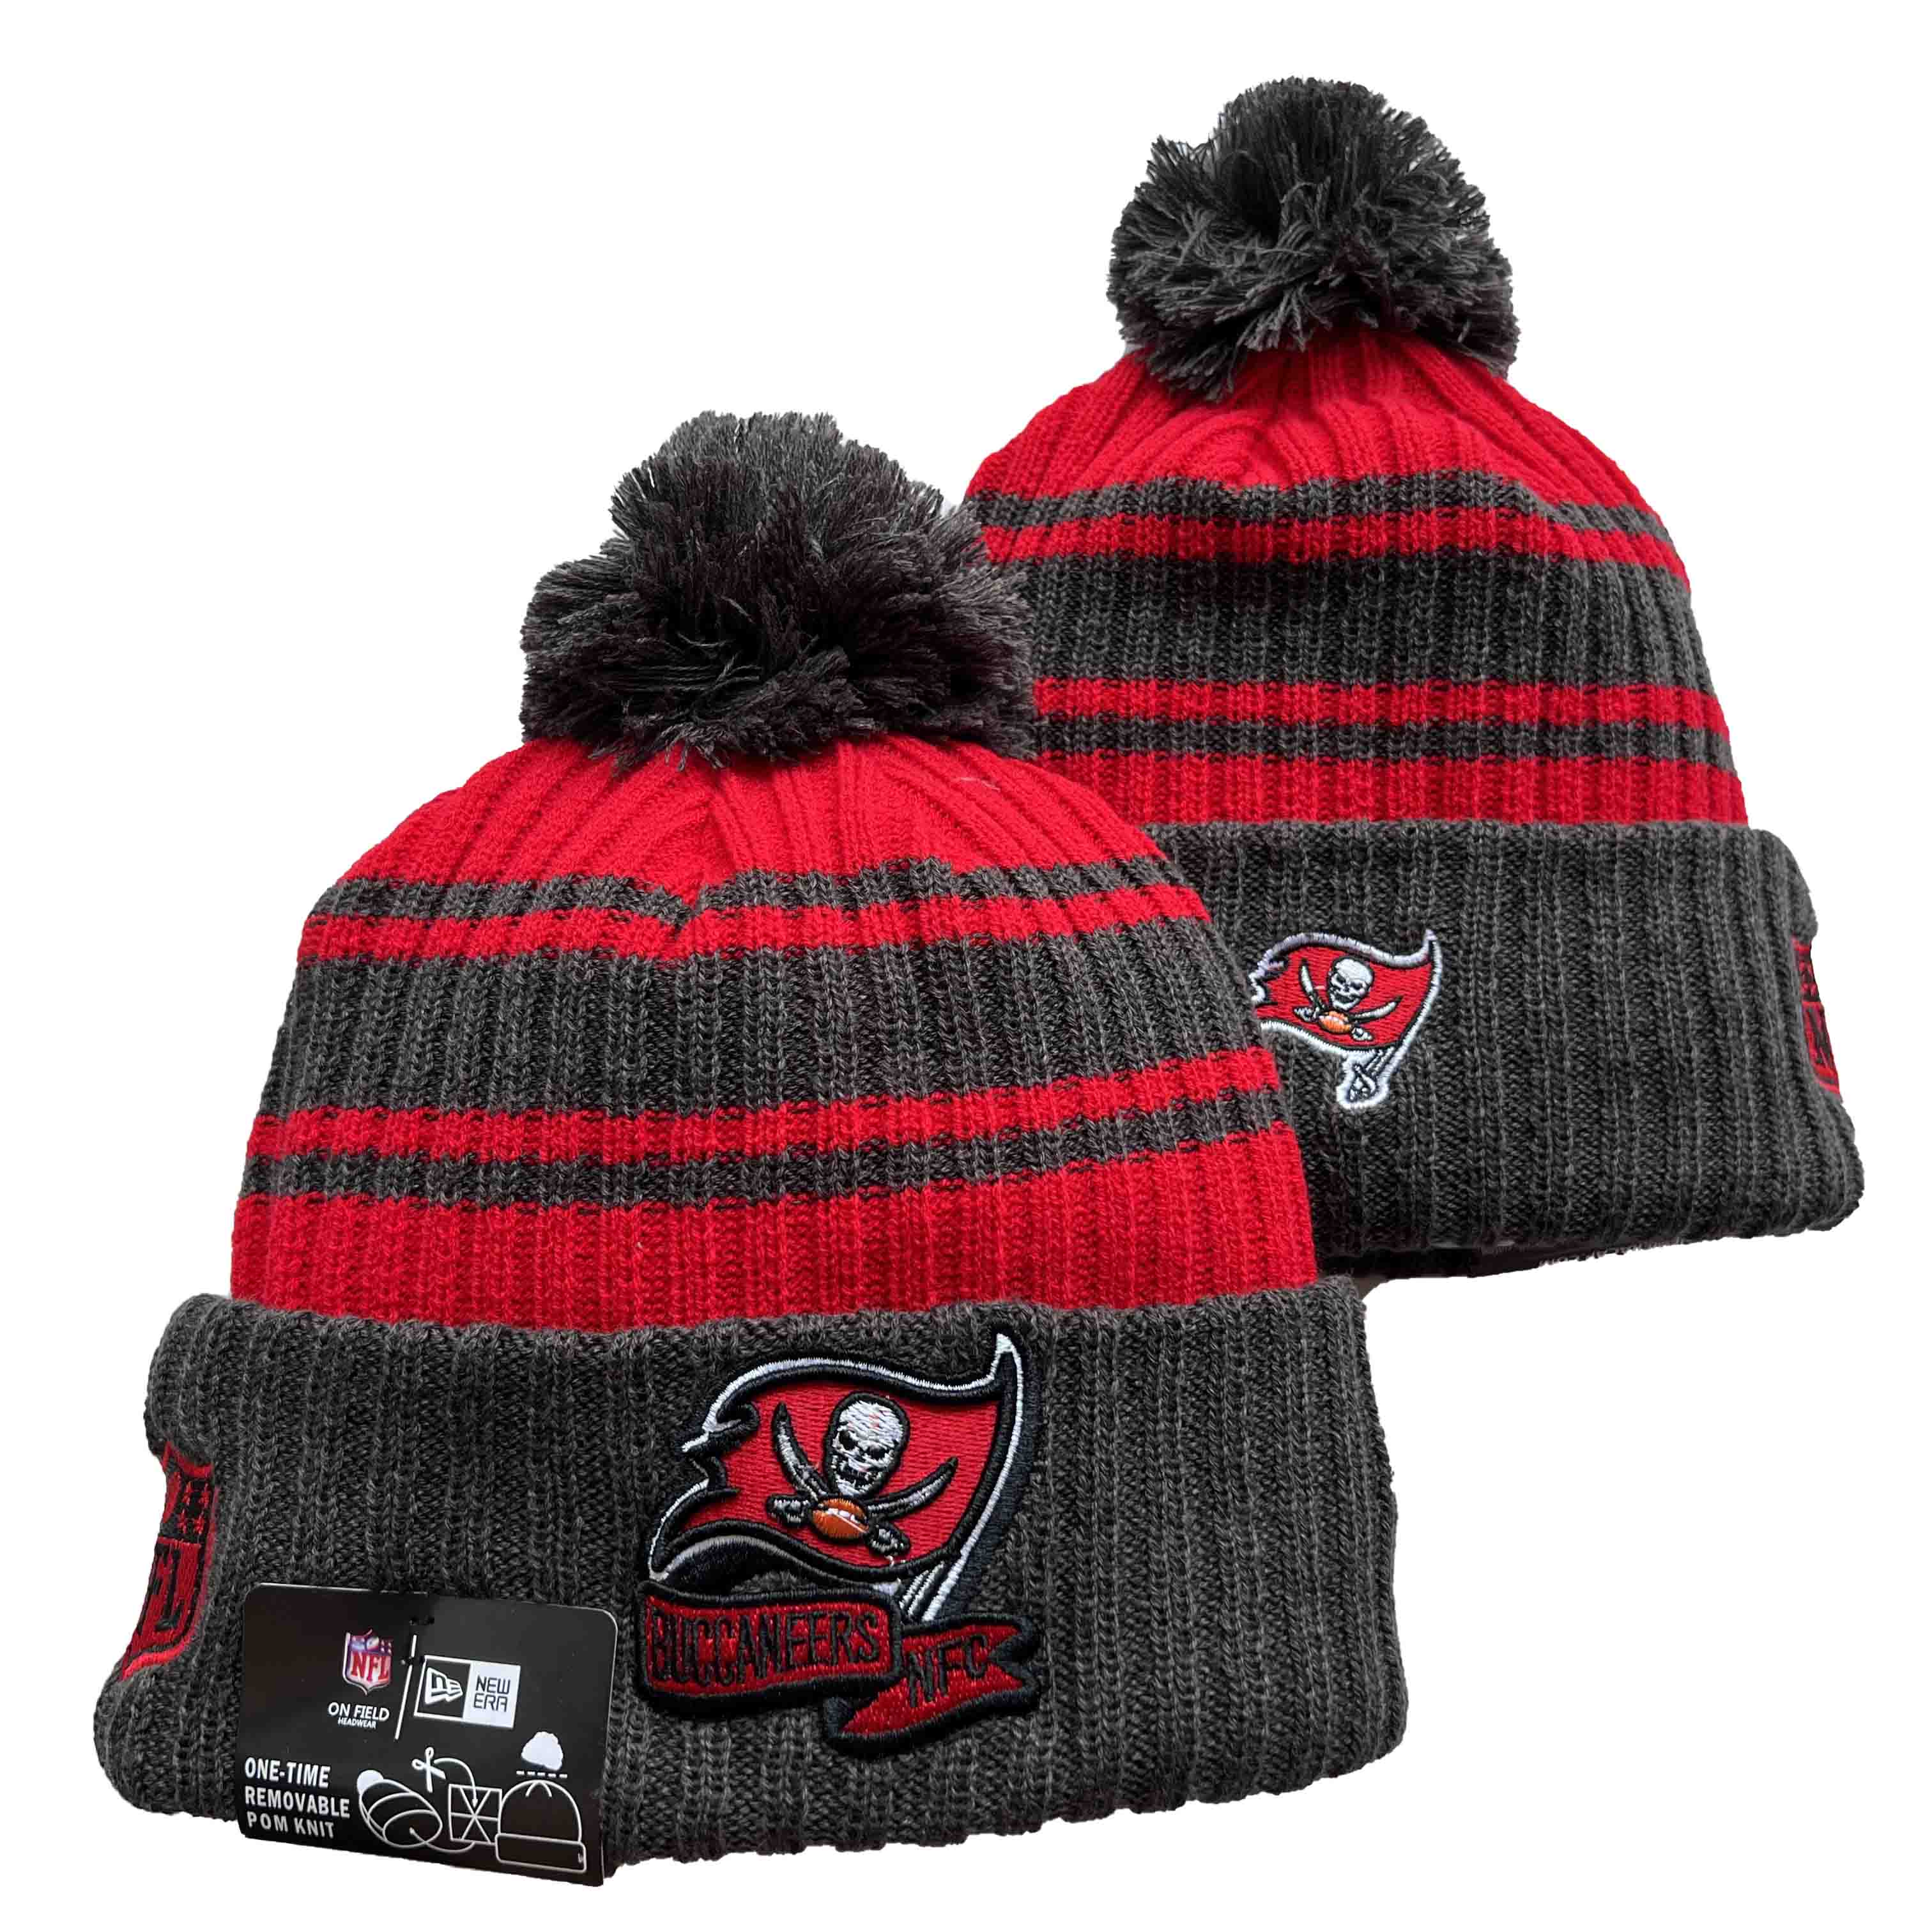 NFL Tampa Bay Buccaneers Beanies Knit Hats-YD1284